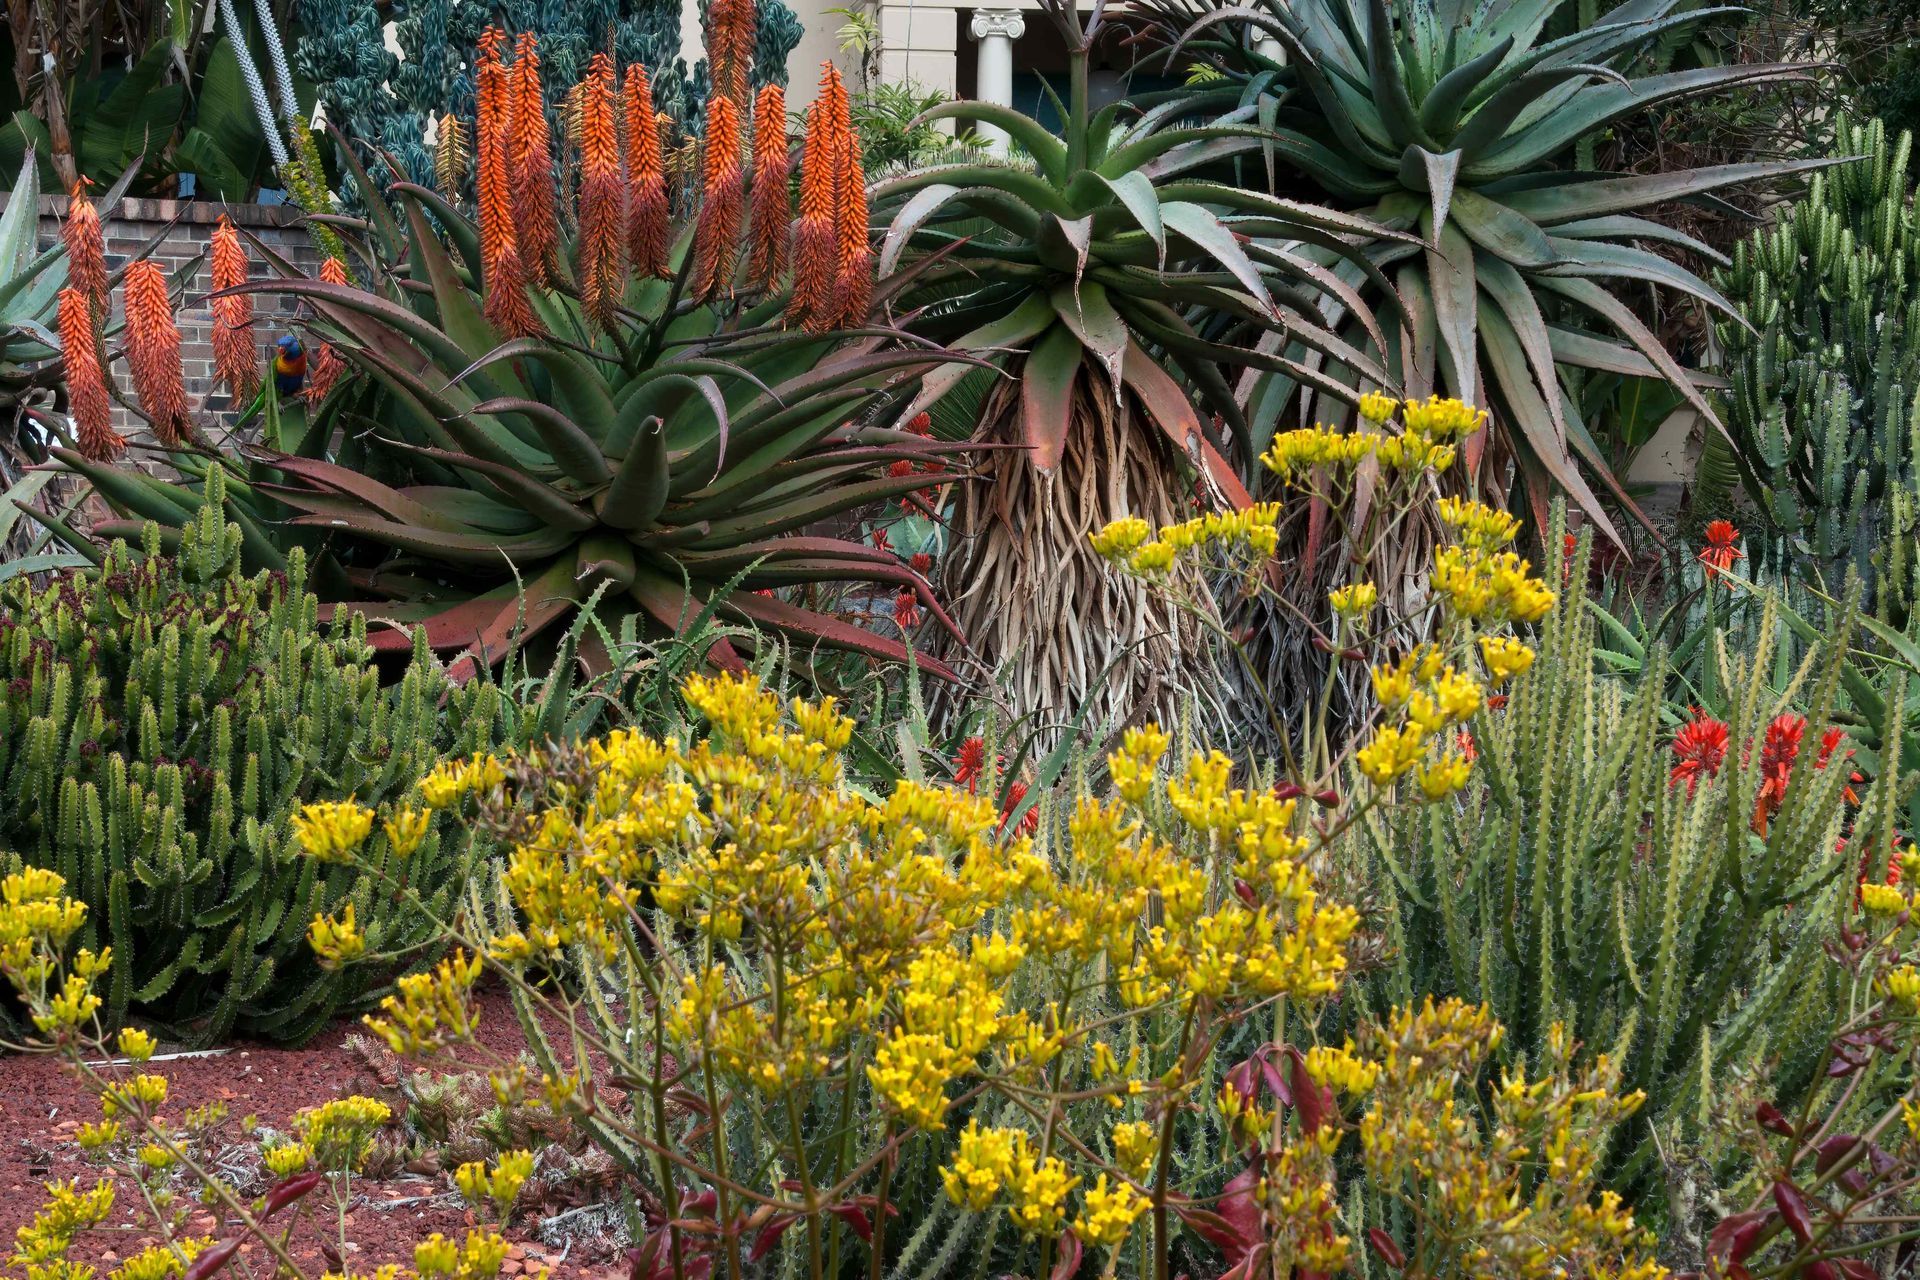 Native flowers and cacti in a xeriscape